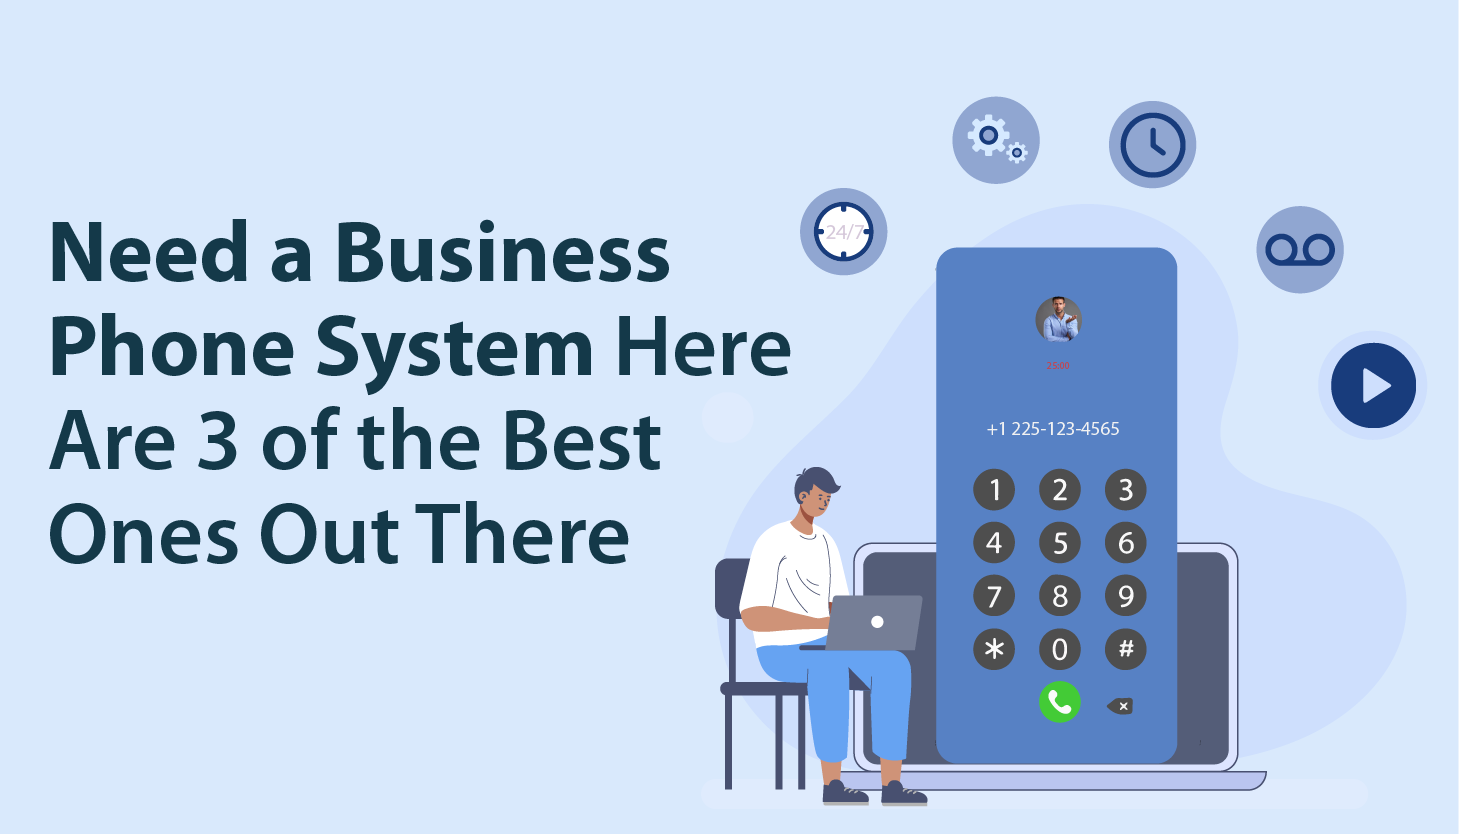  Need a Business Phone System Here Are 3 of the Best Ones Out There